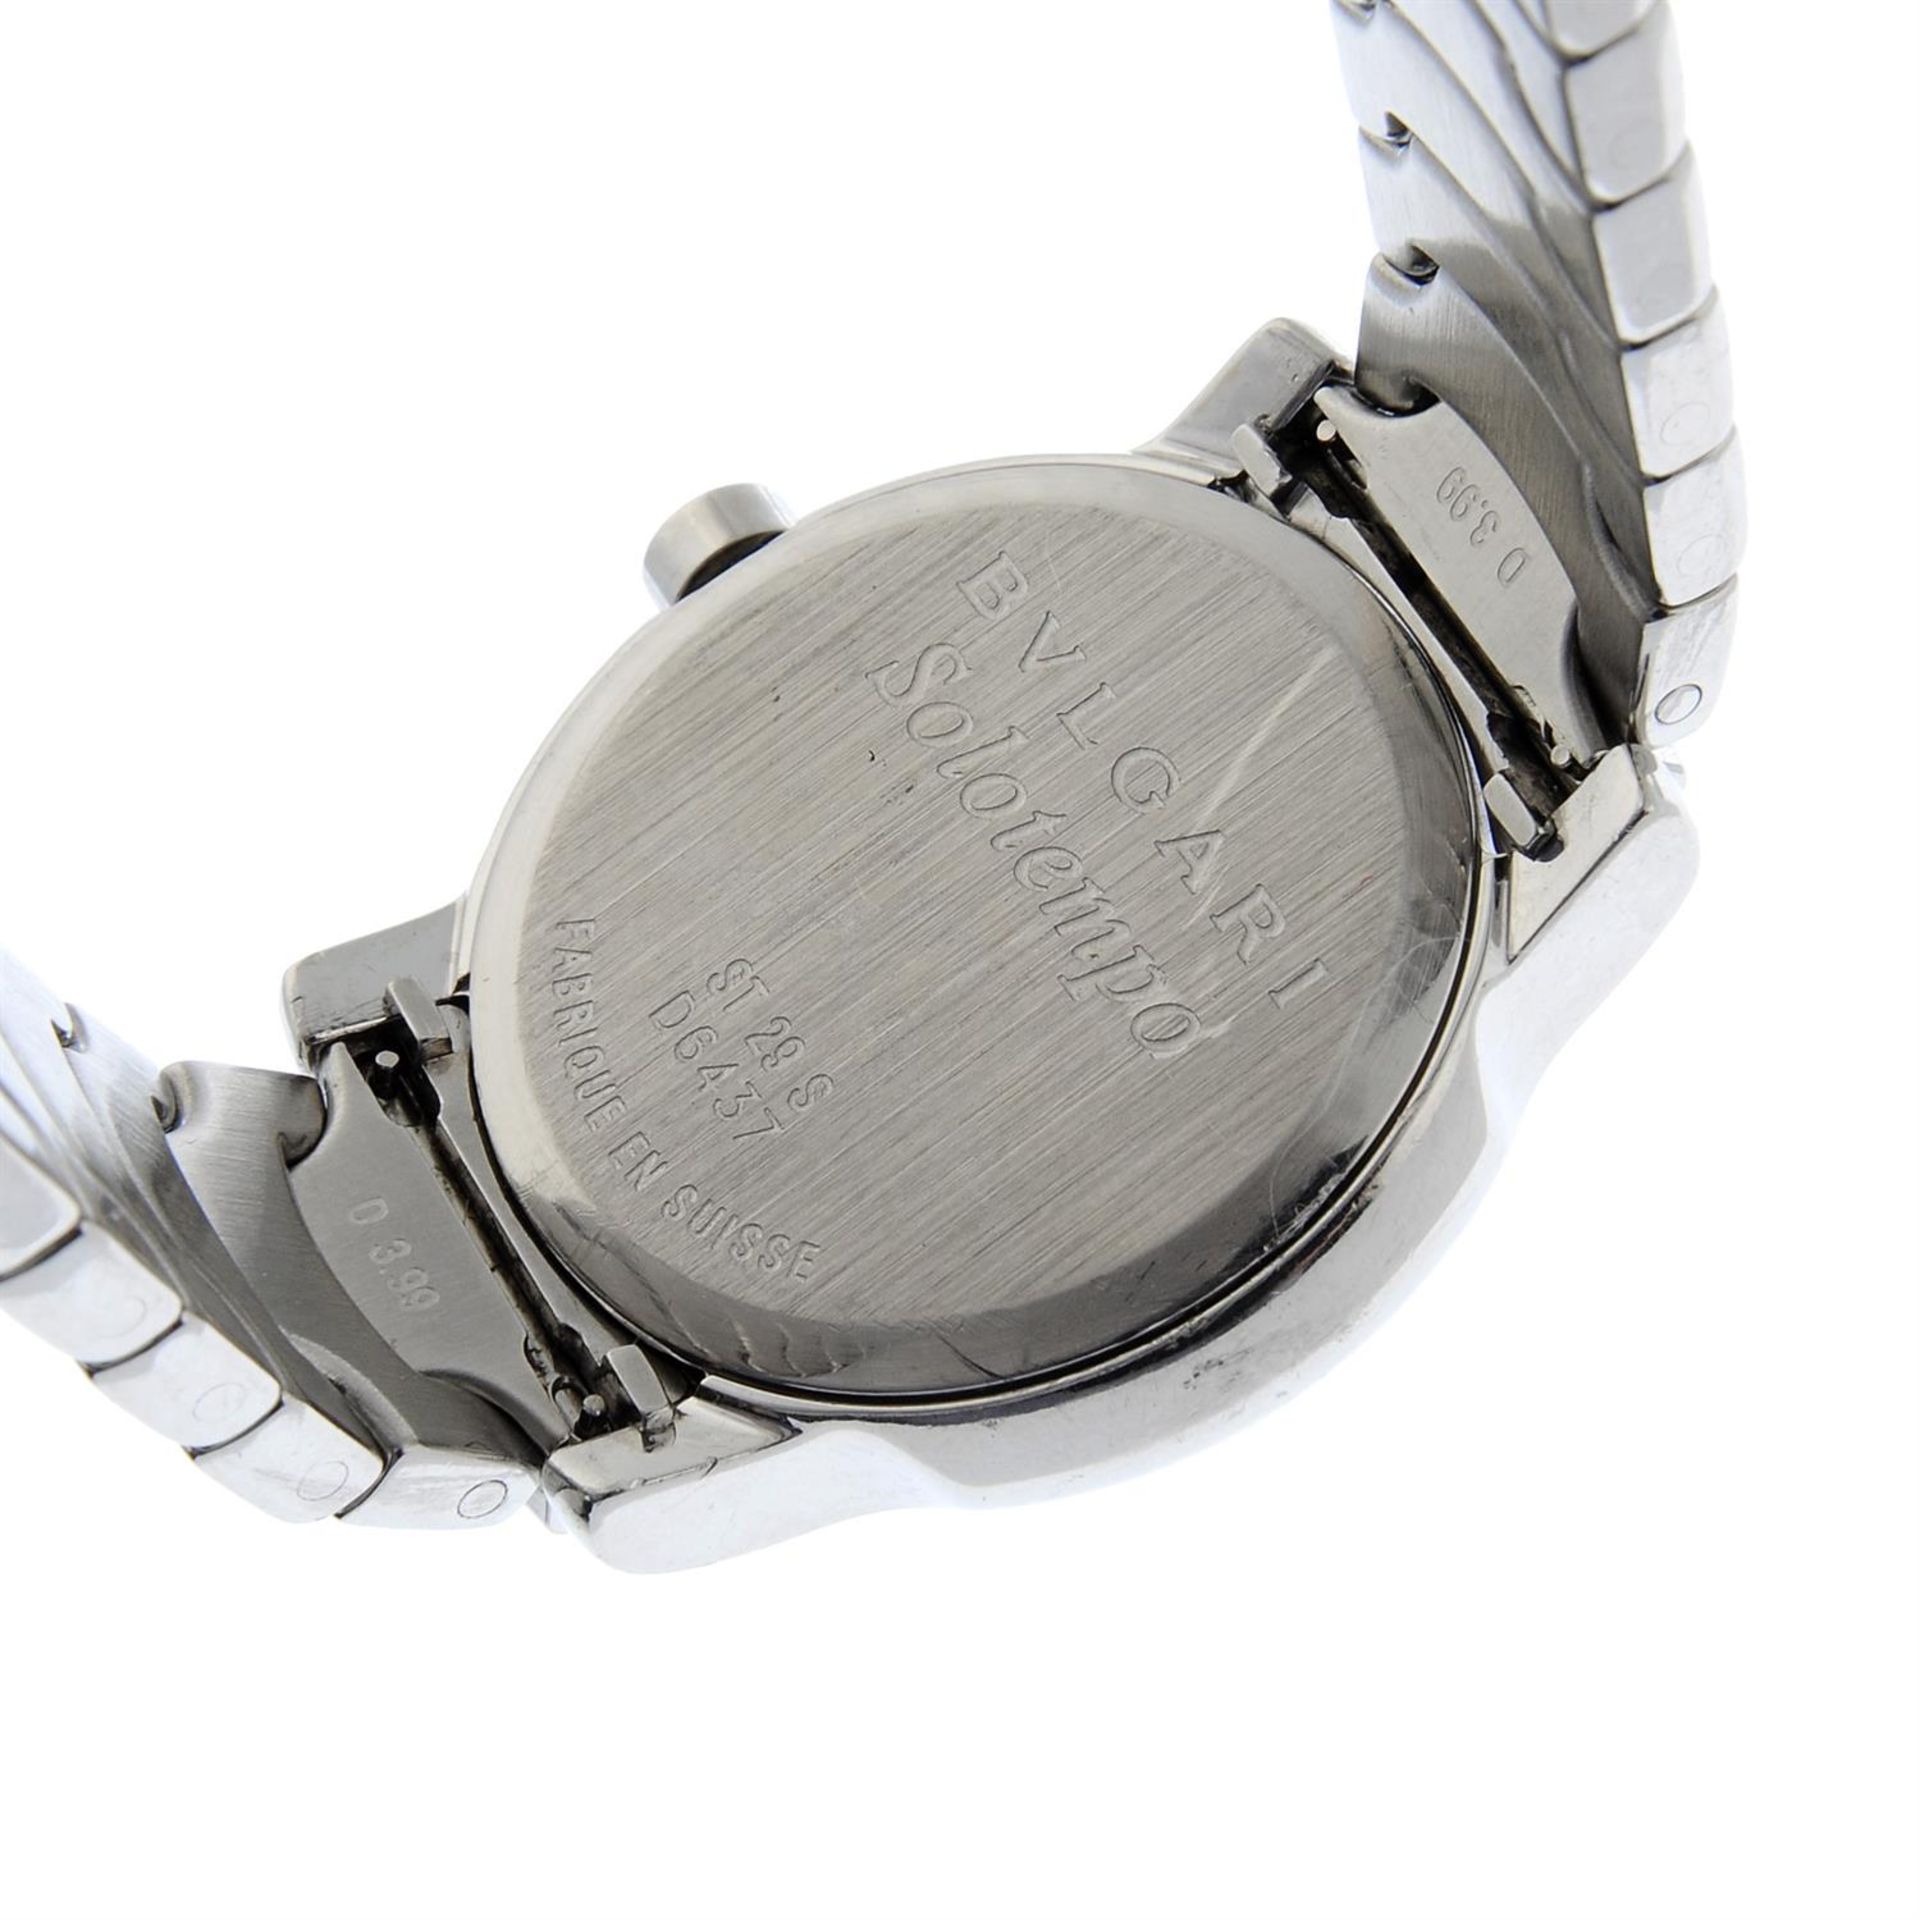 BULGARI - a stainless steel Solotempo bracelet watch, 29mm. - Image 4 of 4